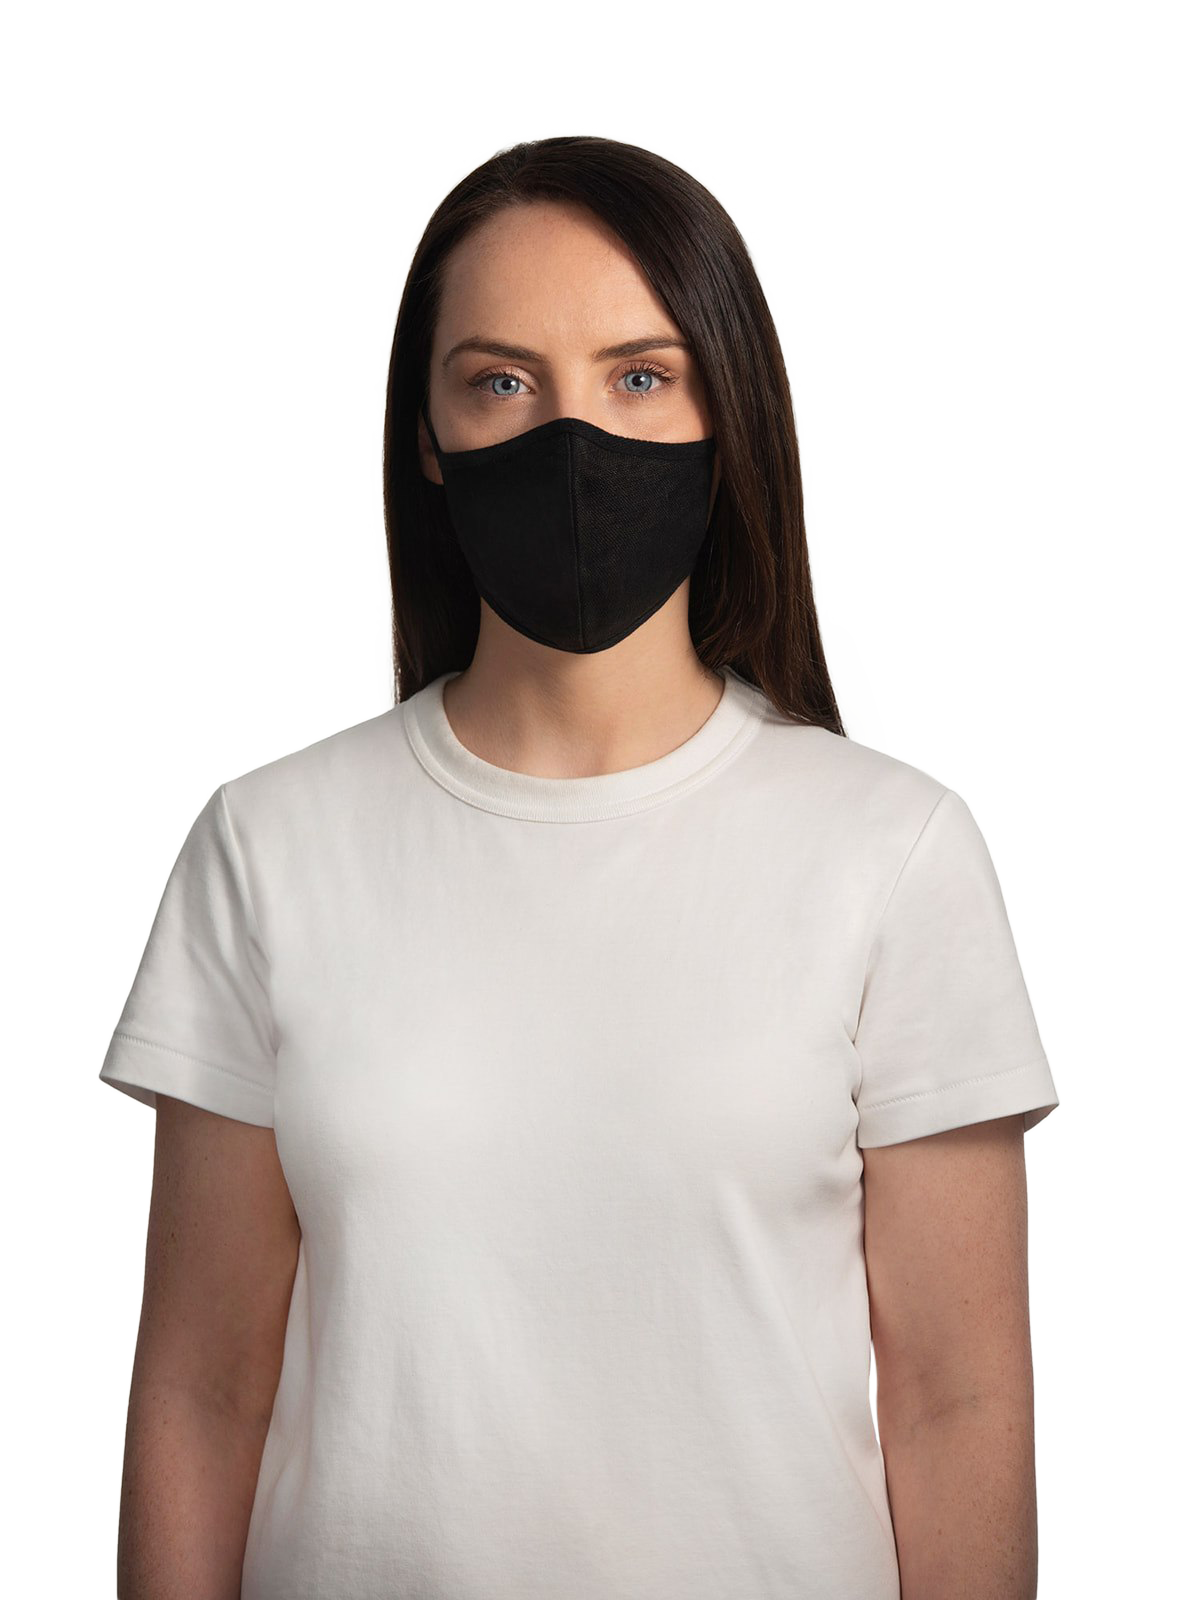 XWASTED female wearing black recycled facemask